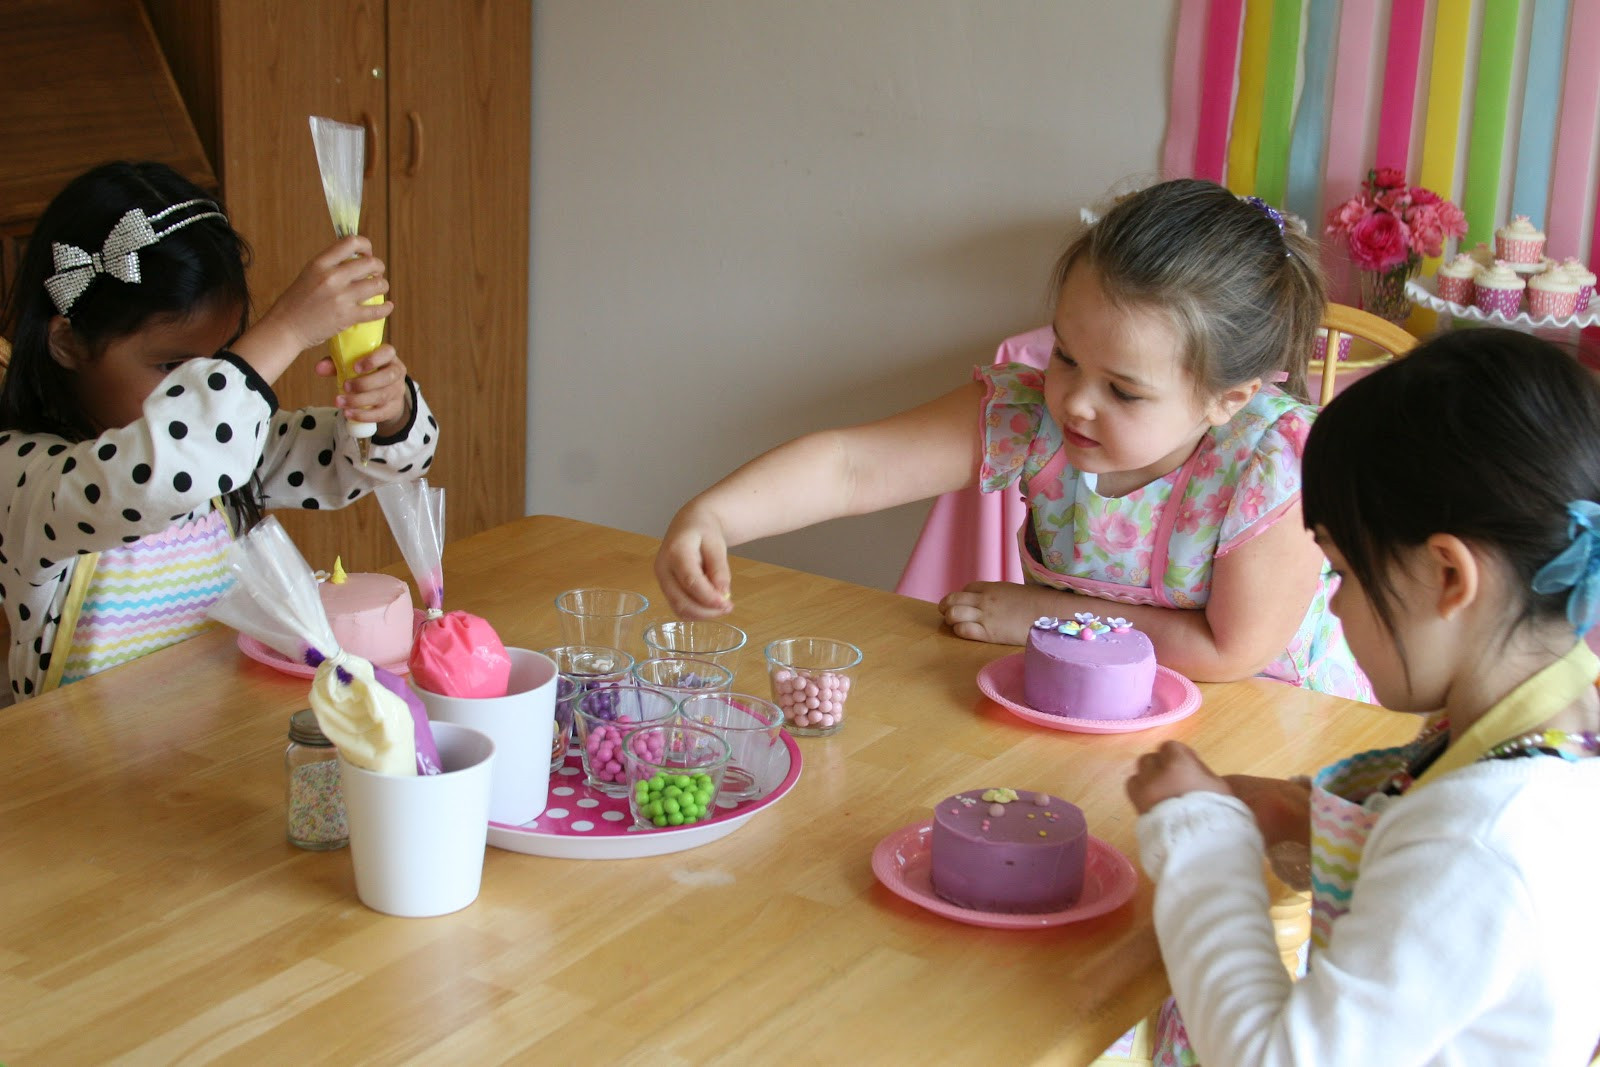 Cake Decorating Birthday Party
 Grace s Cake Decorating Party Glorious Treats